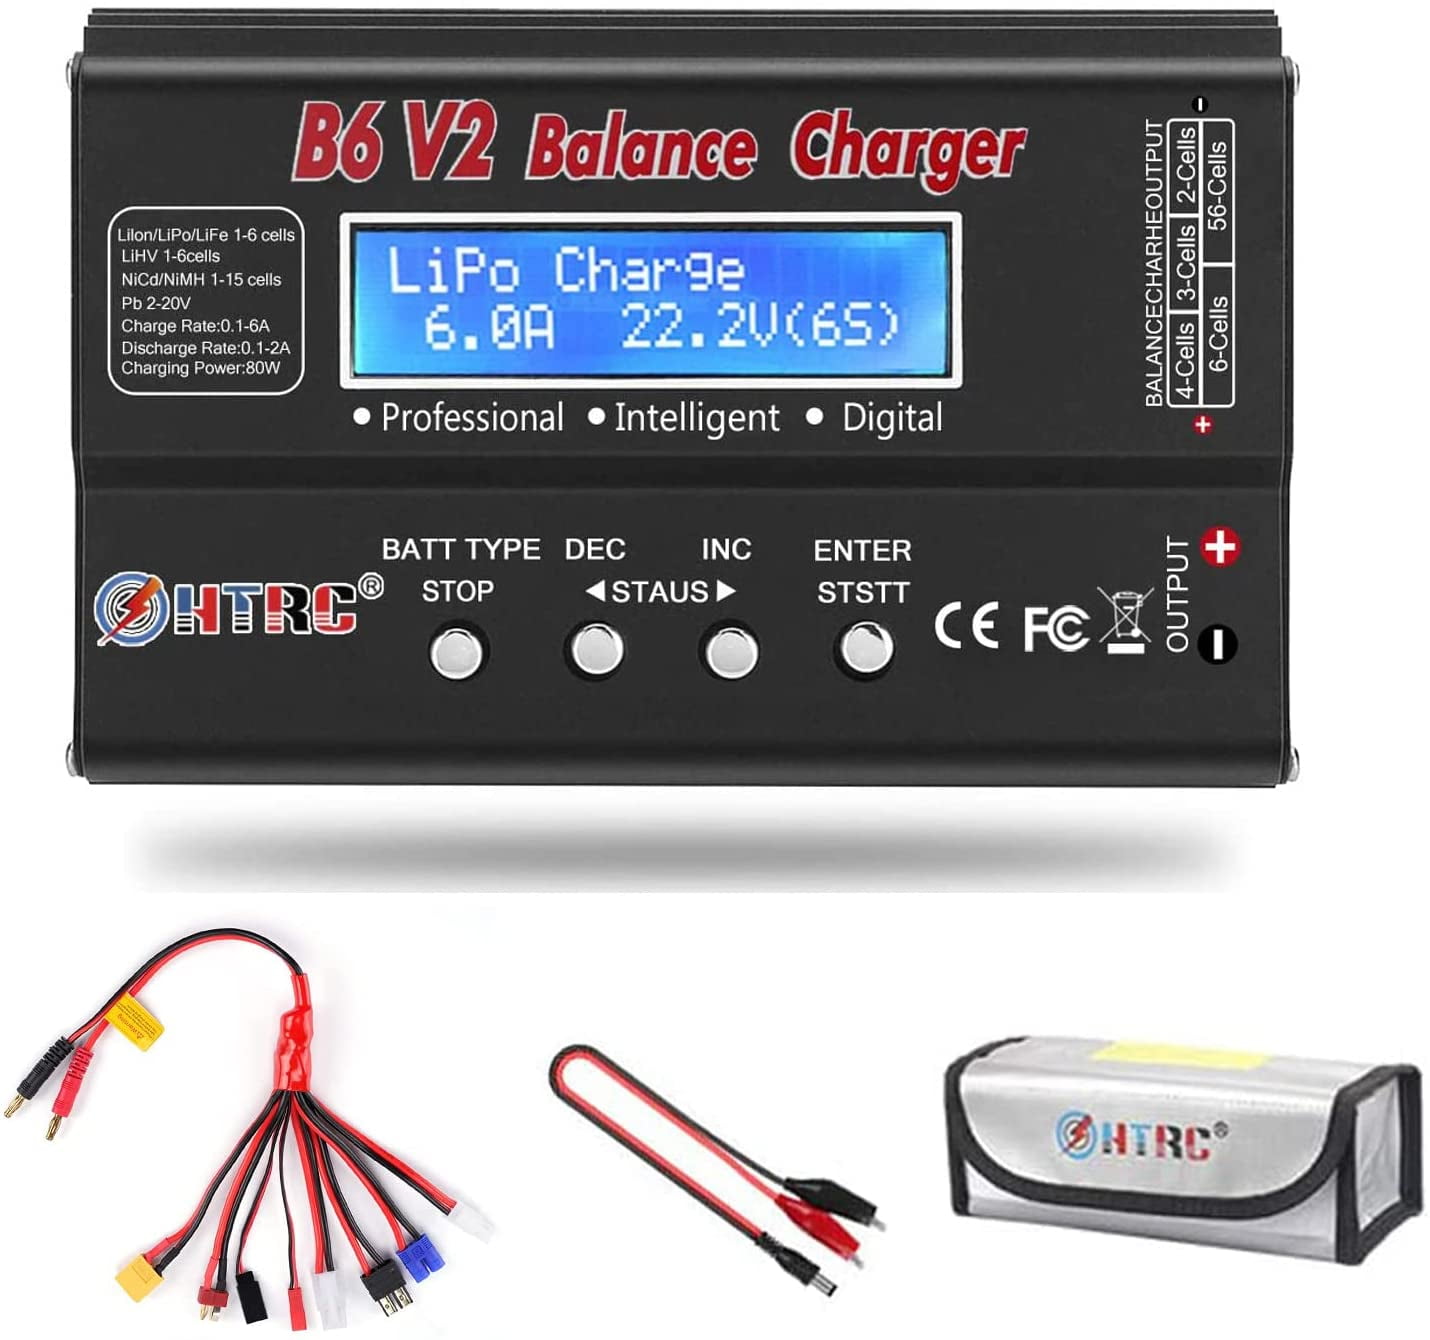 LiPo Balance Charger Power Supply 1S-6S Digital Discharger Battery Pack Charger 80W 6A for Li-ion Life NiCd NiMH LiHV PB Smart Battery,Deans Connectors 